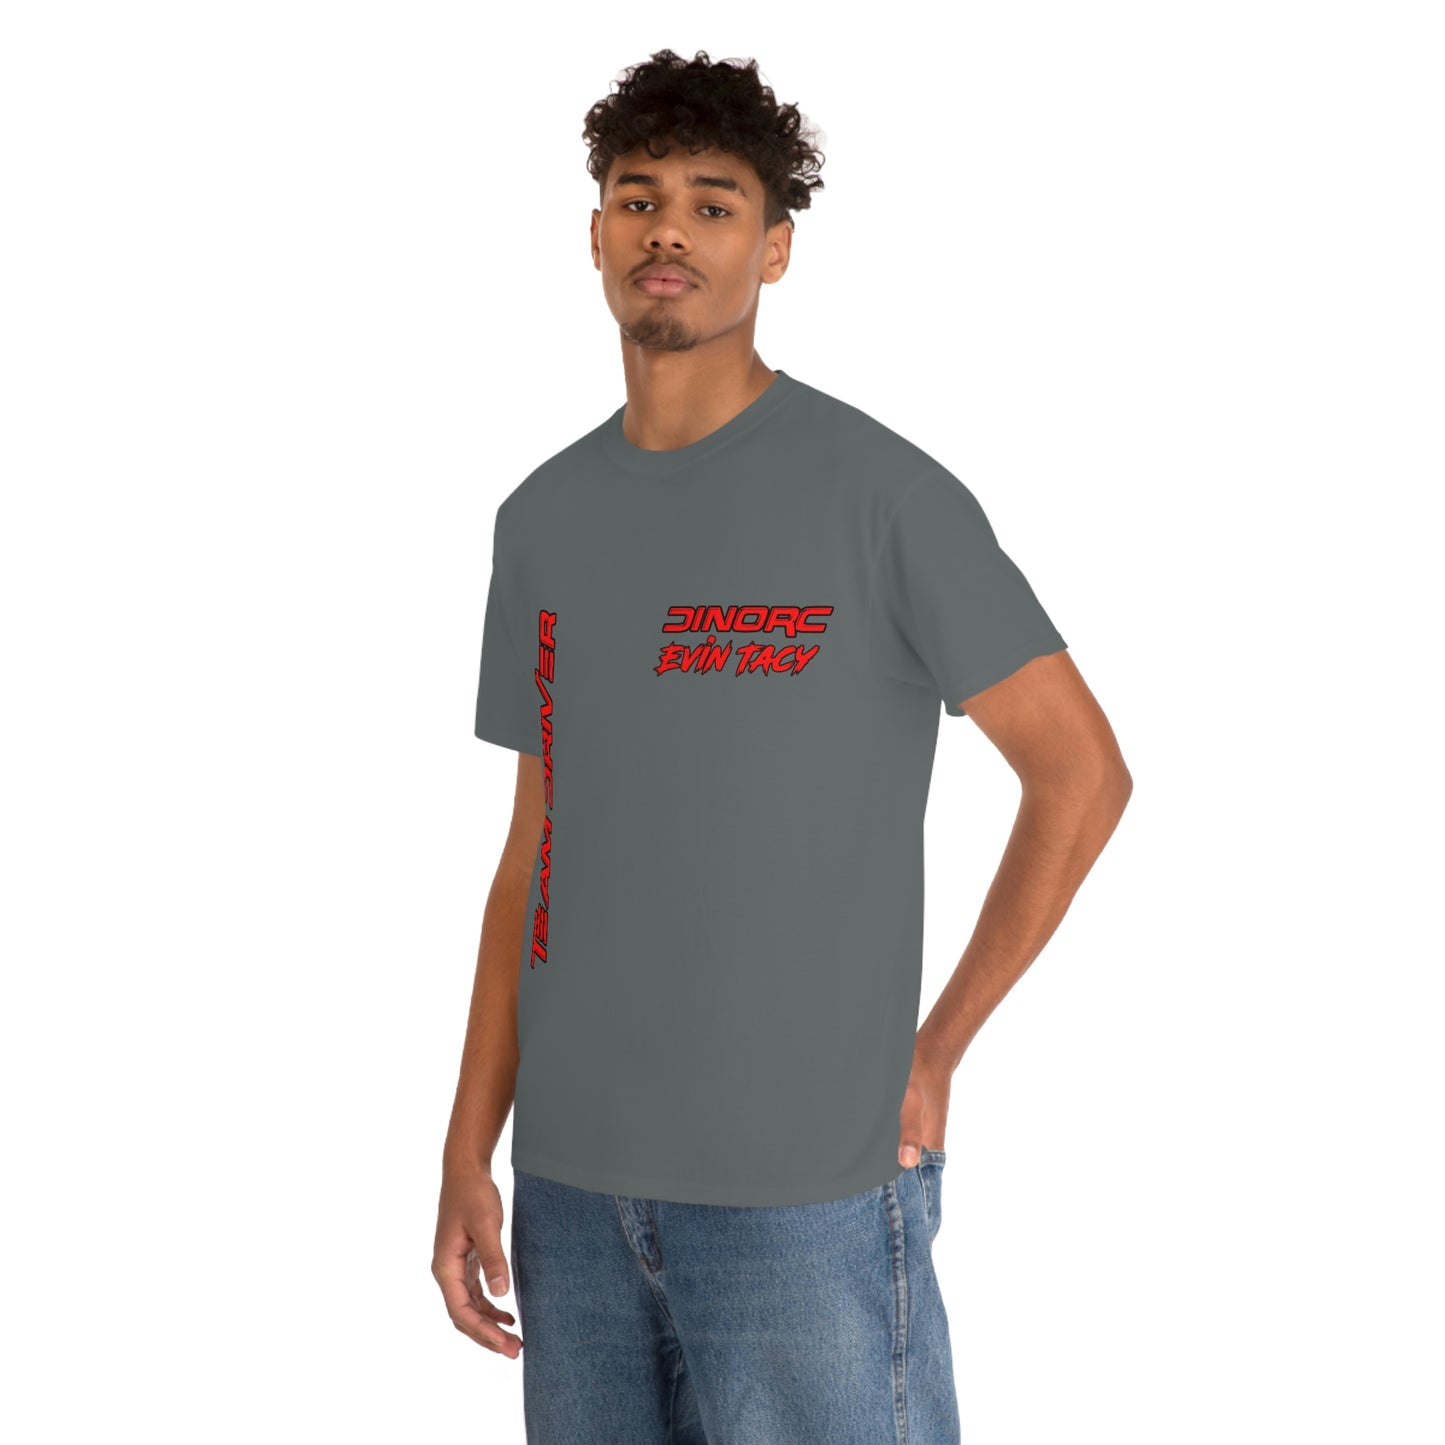 Team Driver Evin Tacy Front and Back DinoRc Logo T-Shirt S-5x 5 colors